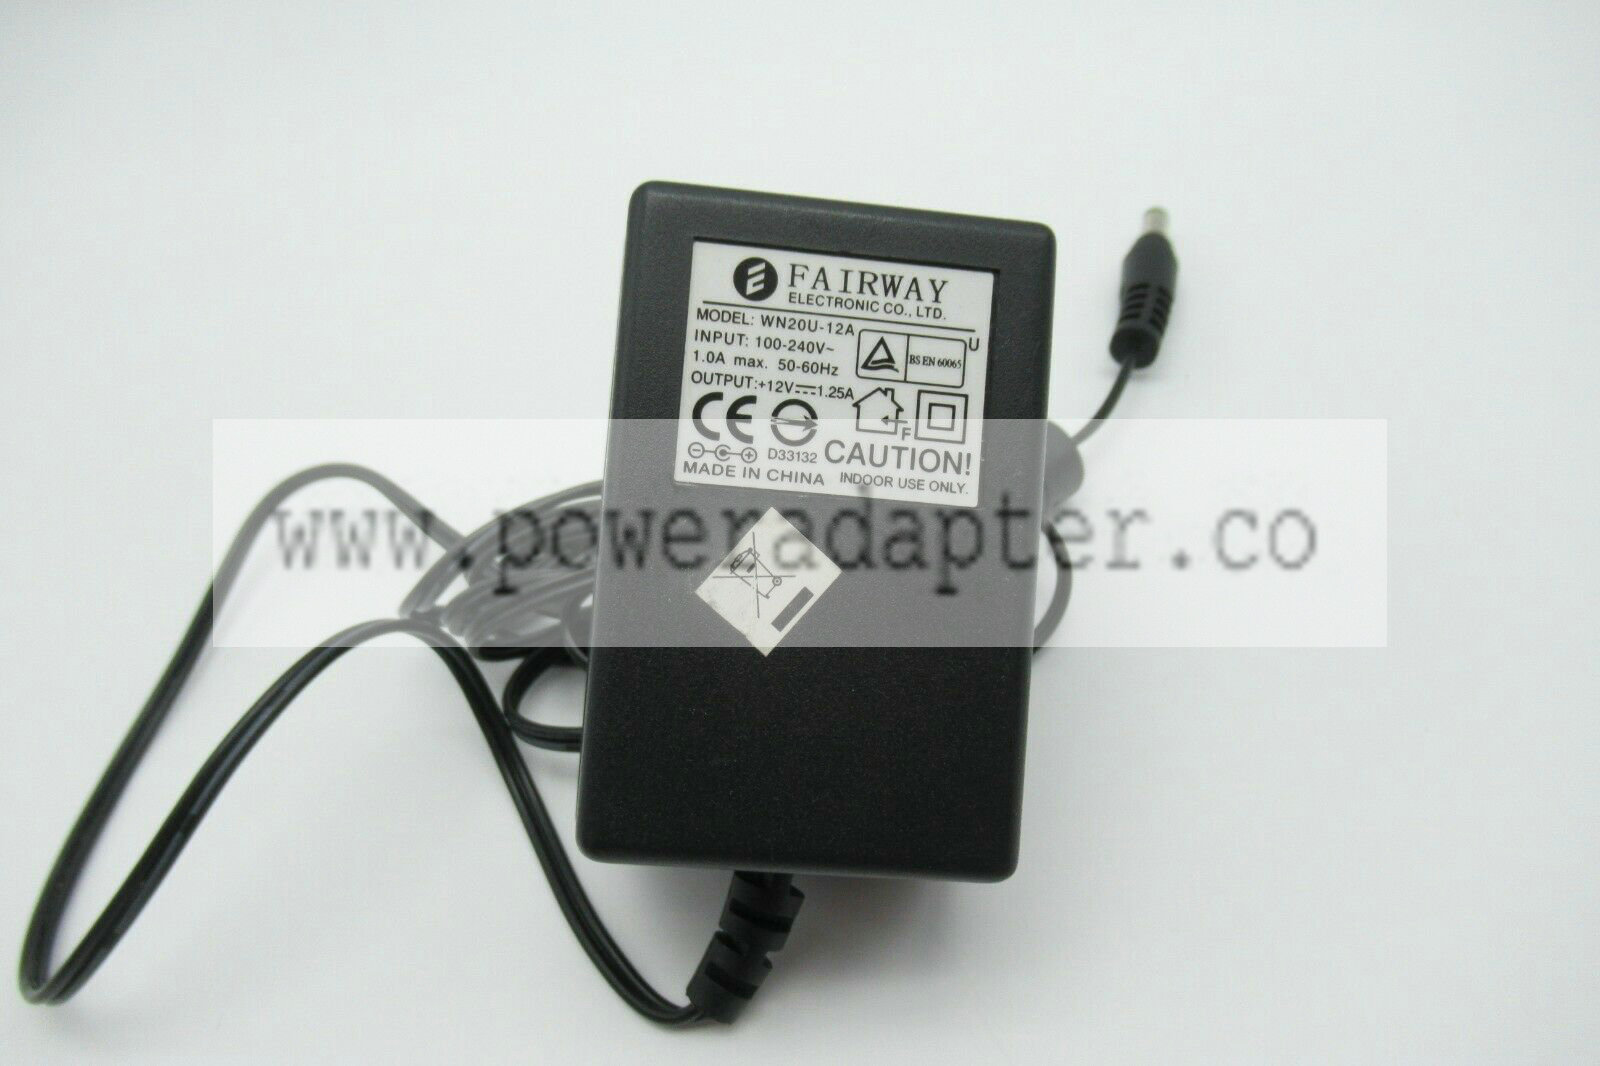 Fairway WN20U-12A 12v 1.25a power adapter for Goodmans portable DVD player Tested and in goood working order Please